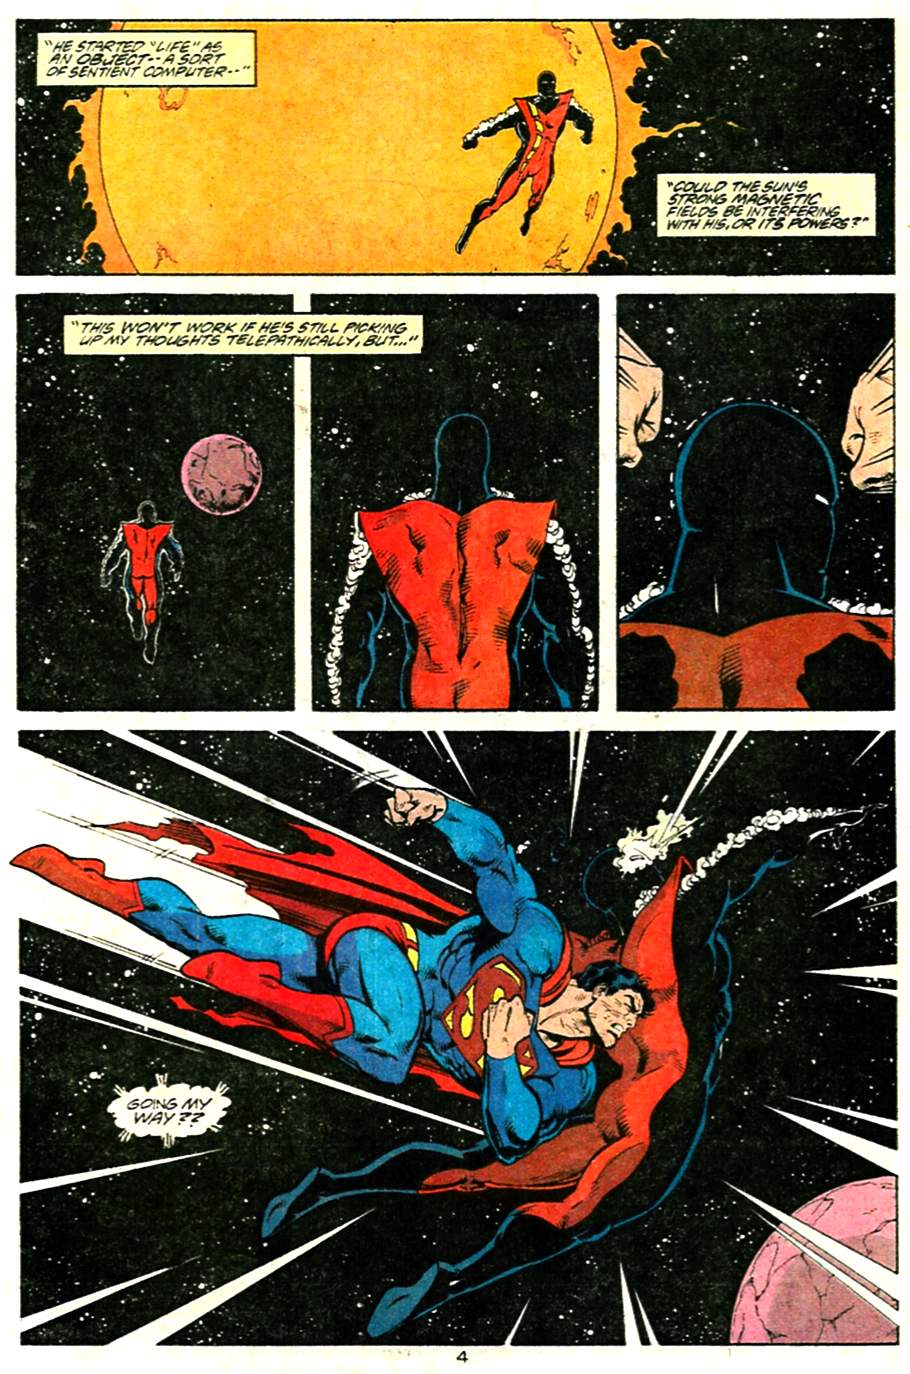 Adventures of Superman (1987) 480 Page 3